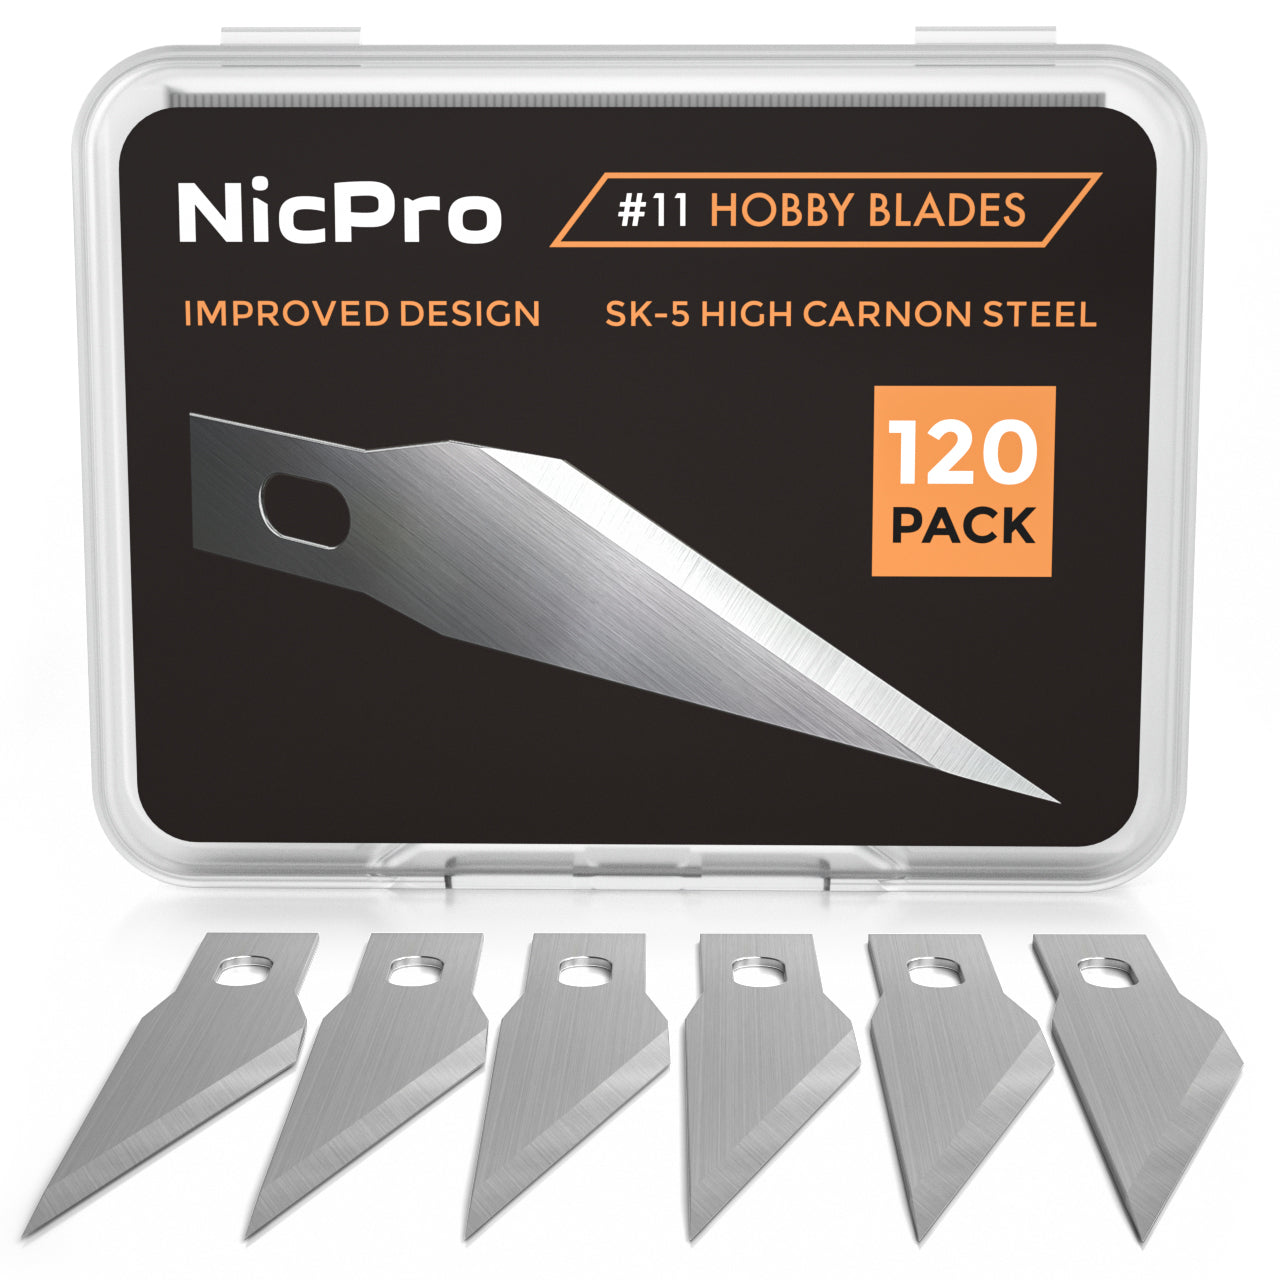 Nicpro 120 PCS Hobby Blades Set SK-5, Utility #11 Art Blades Refill Cutting Tool with Storage Case for Craft, Hobby, Scrapbooking, Stencil